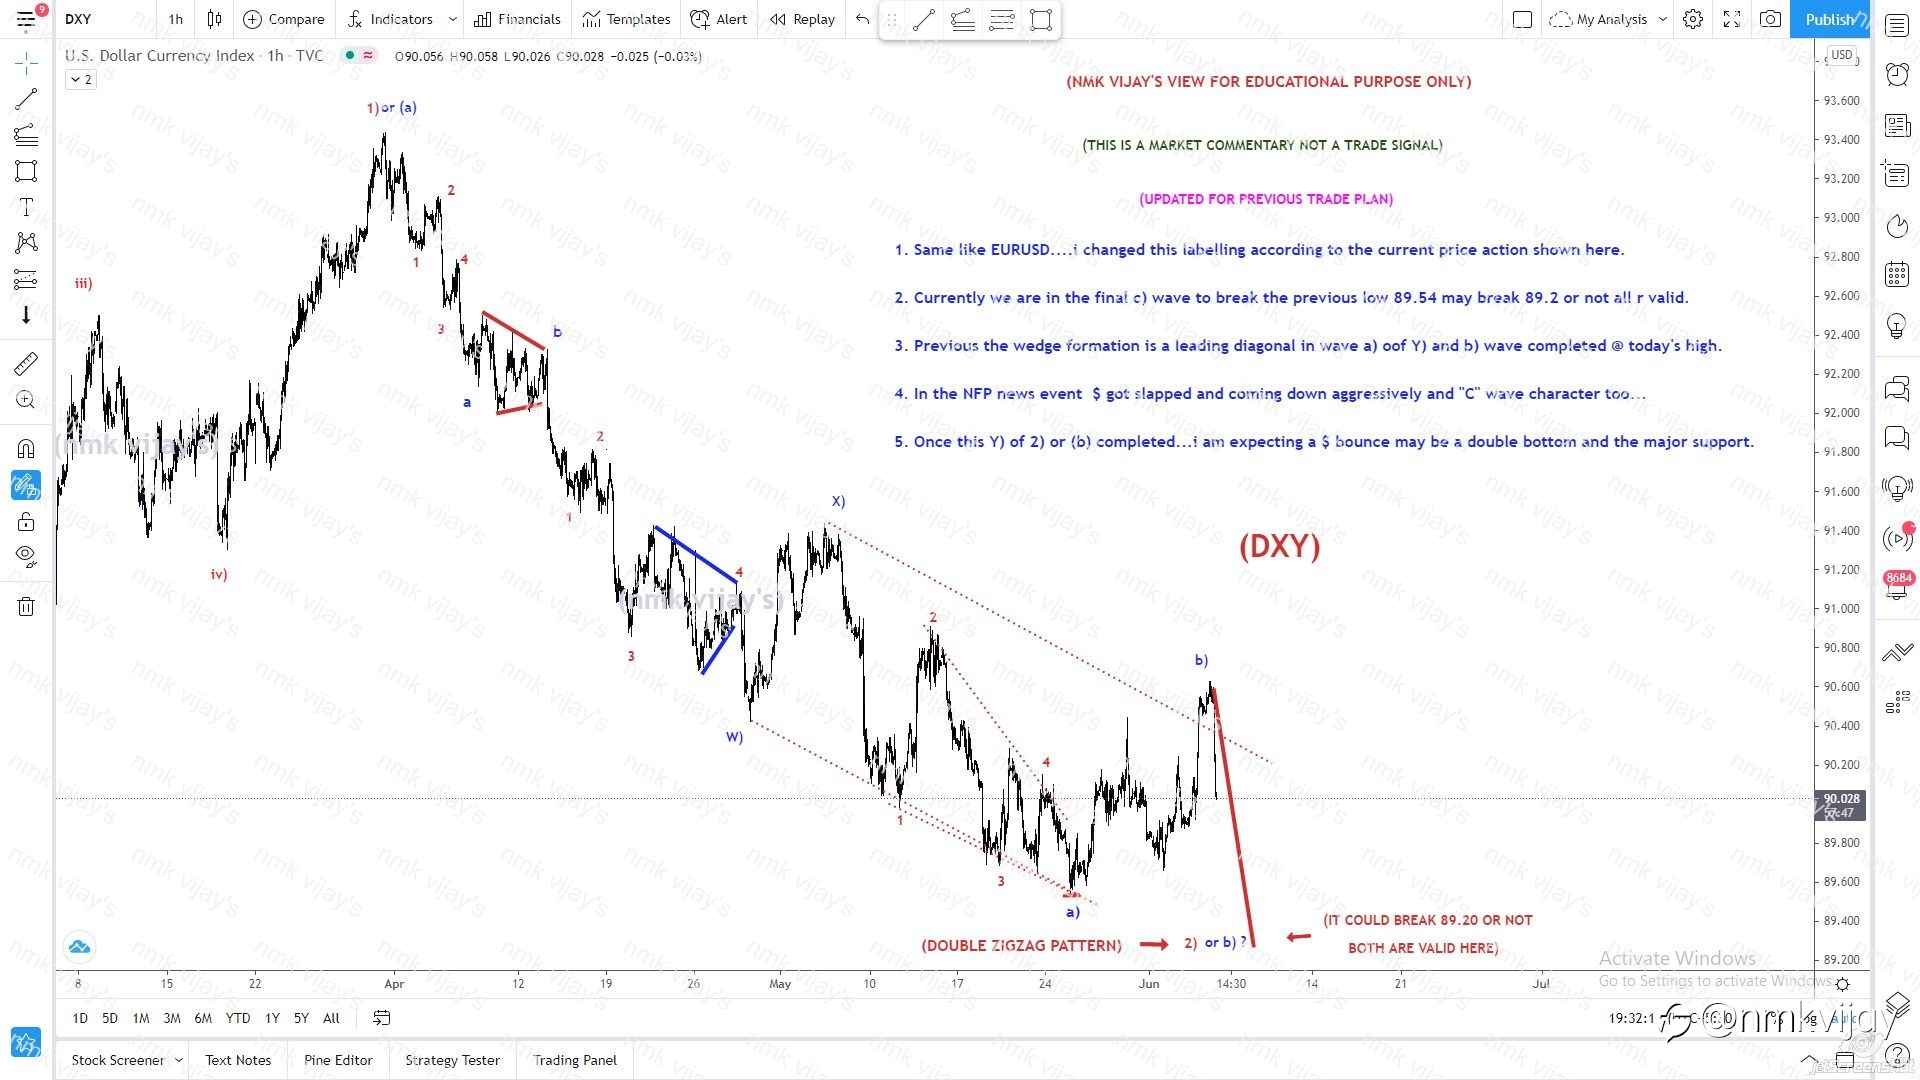 #DXY-DXY- Labelling changed WXY Double ZIGZAG in Y) of 2) or (b)...